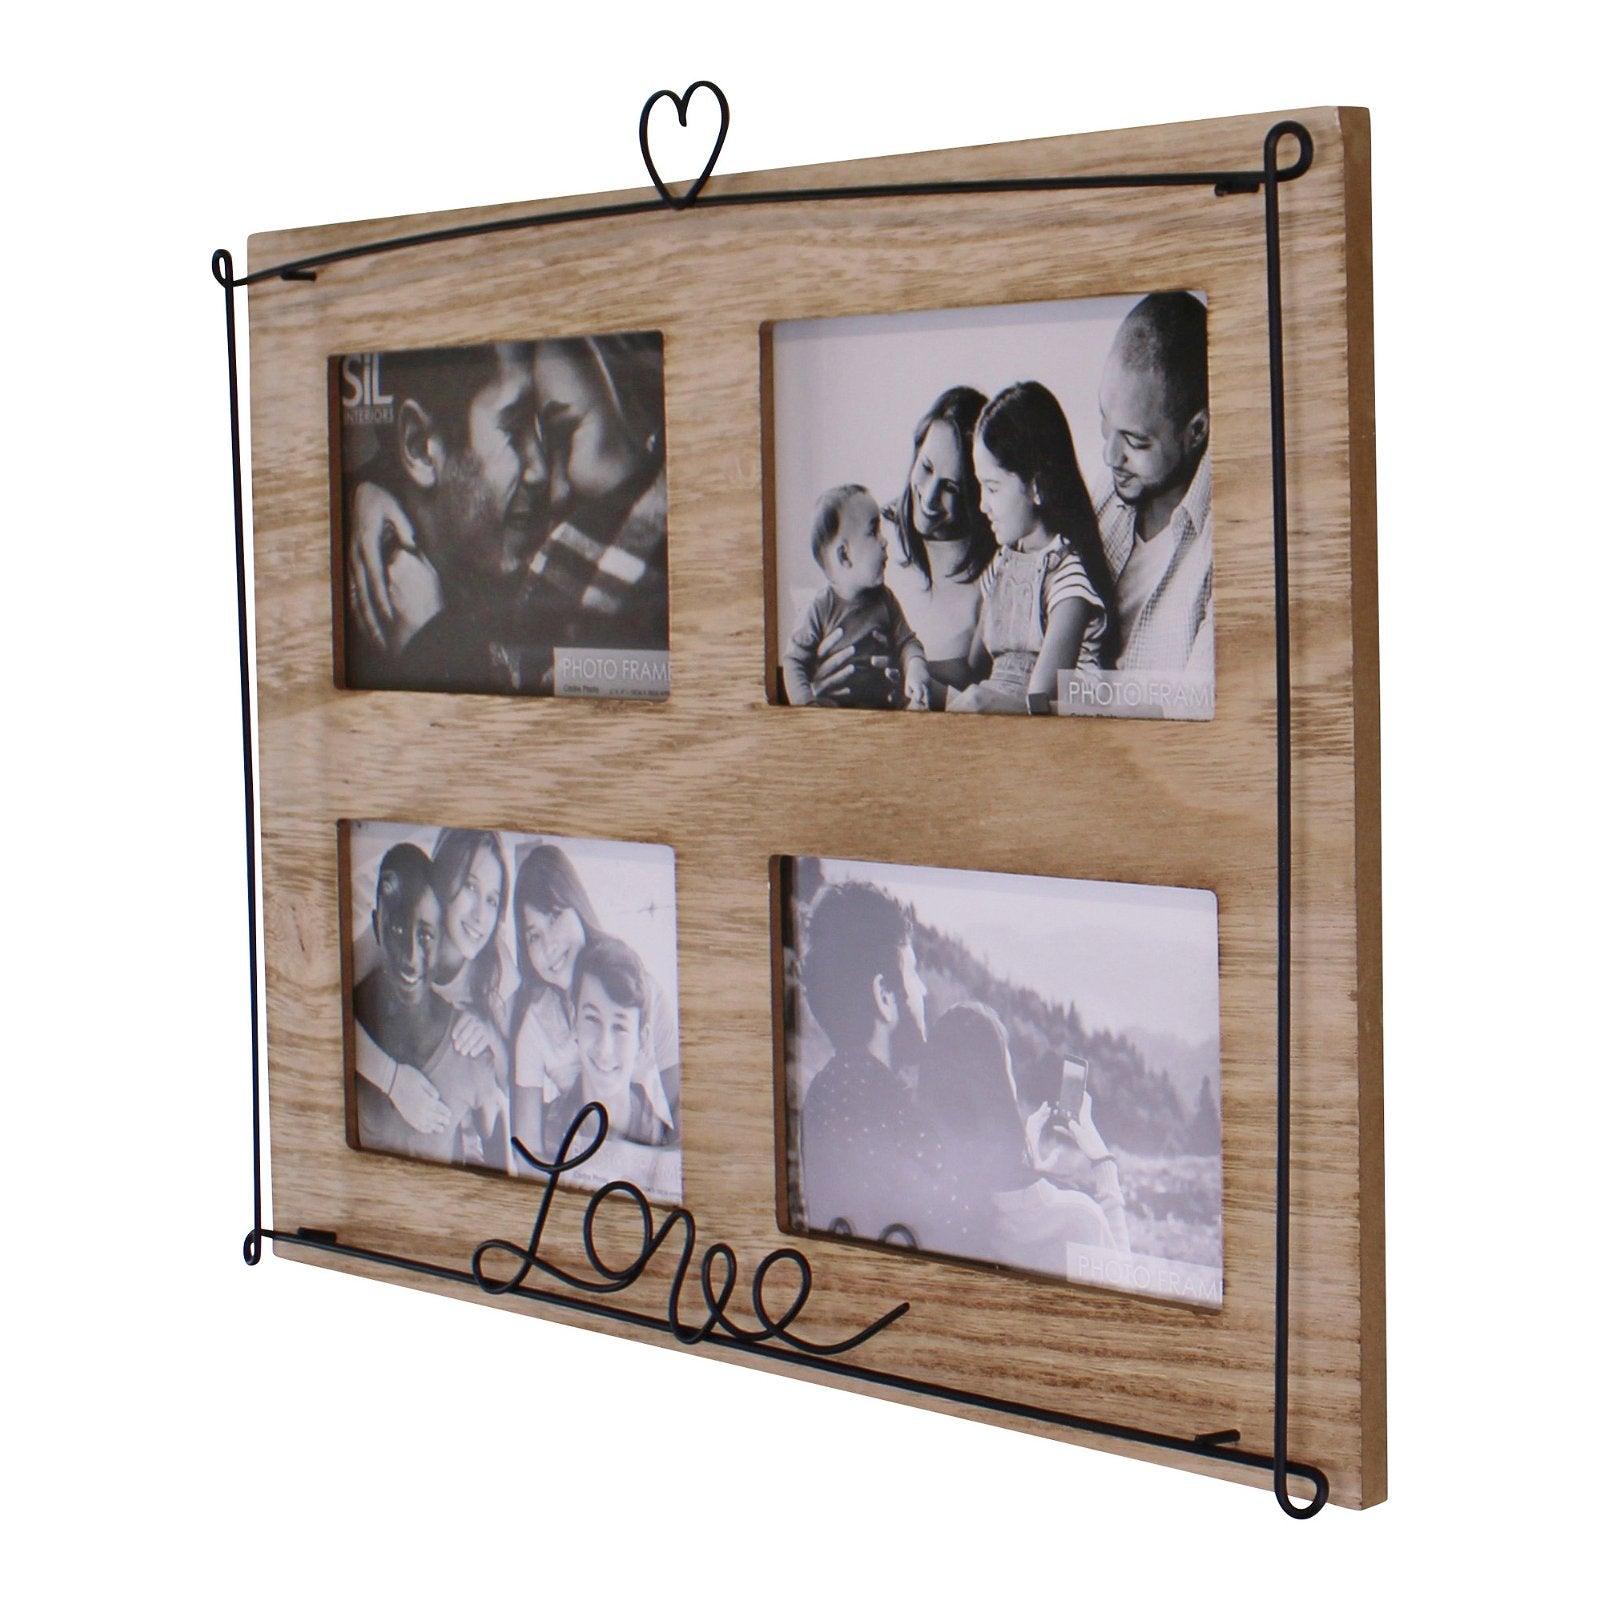 View Multi Photo Frame Holds 4 Photos Love Design information